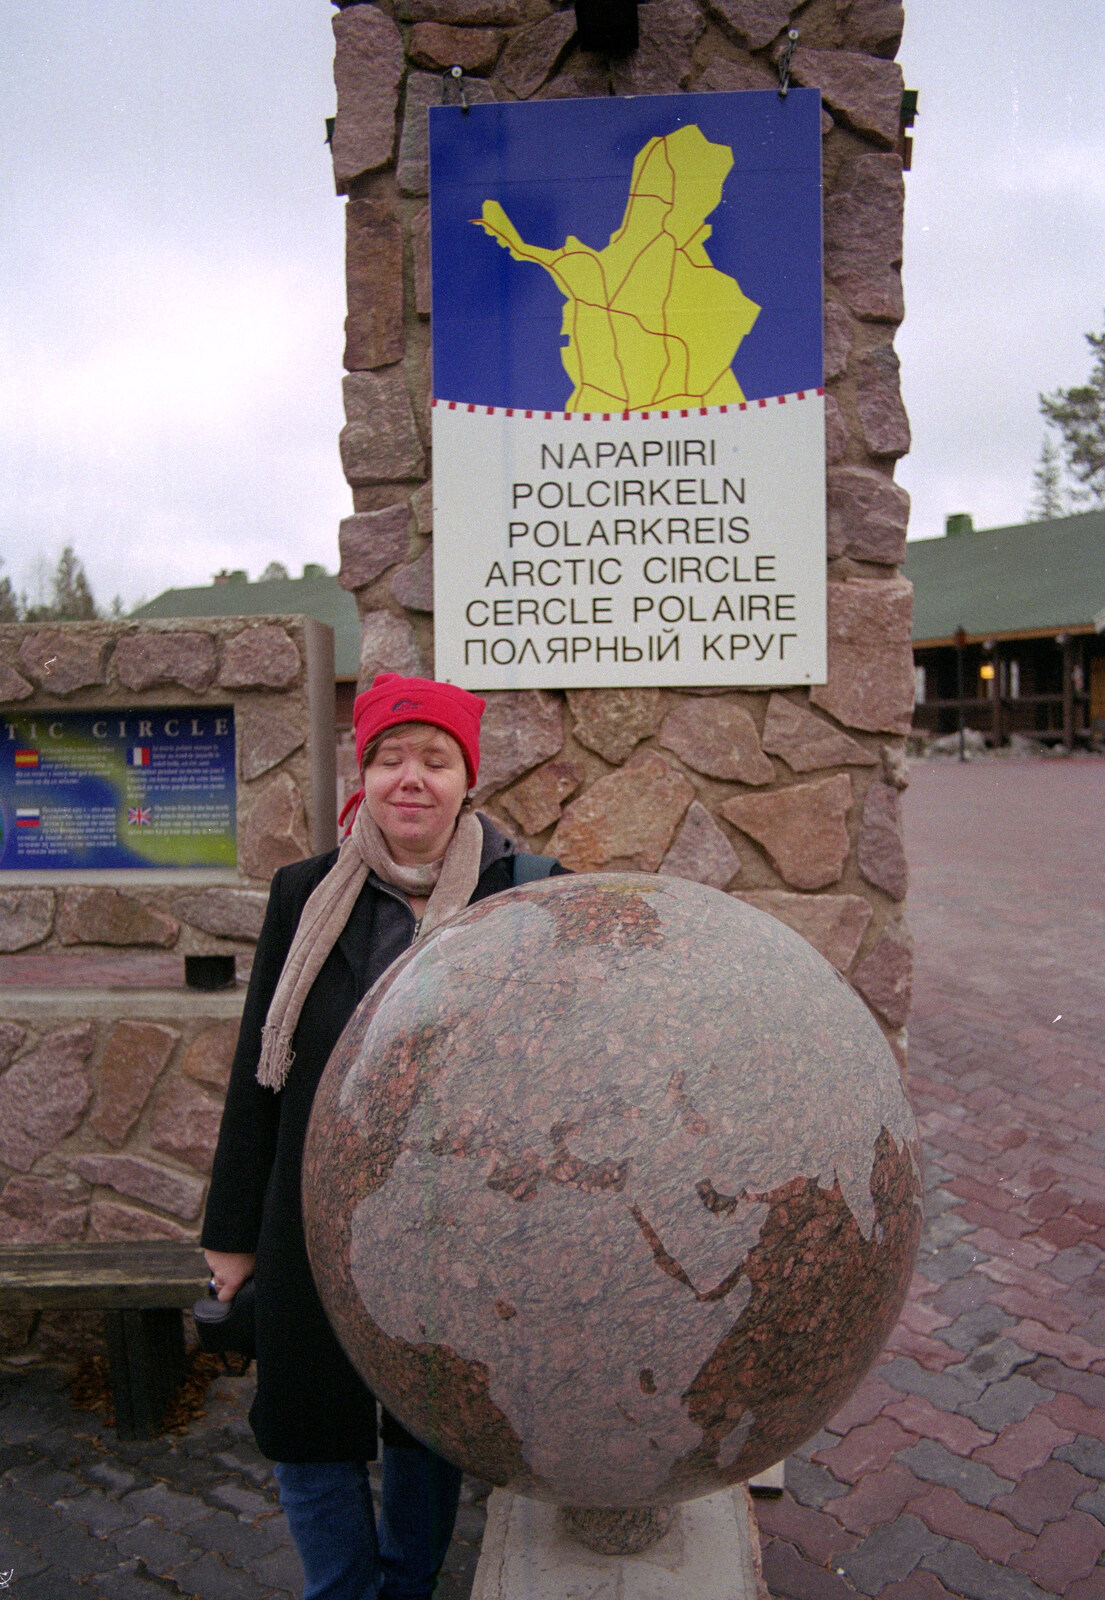 Sis stands behind a stone globe from A Trip to Rovaniemi and the Arctic Circle, Lapland, Finland - 28th November 1999